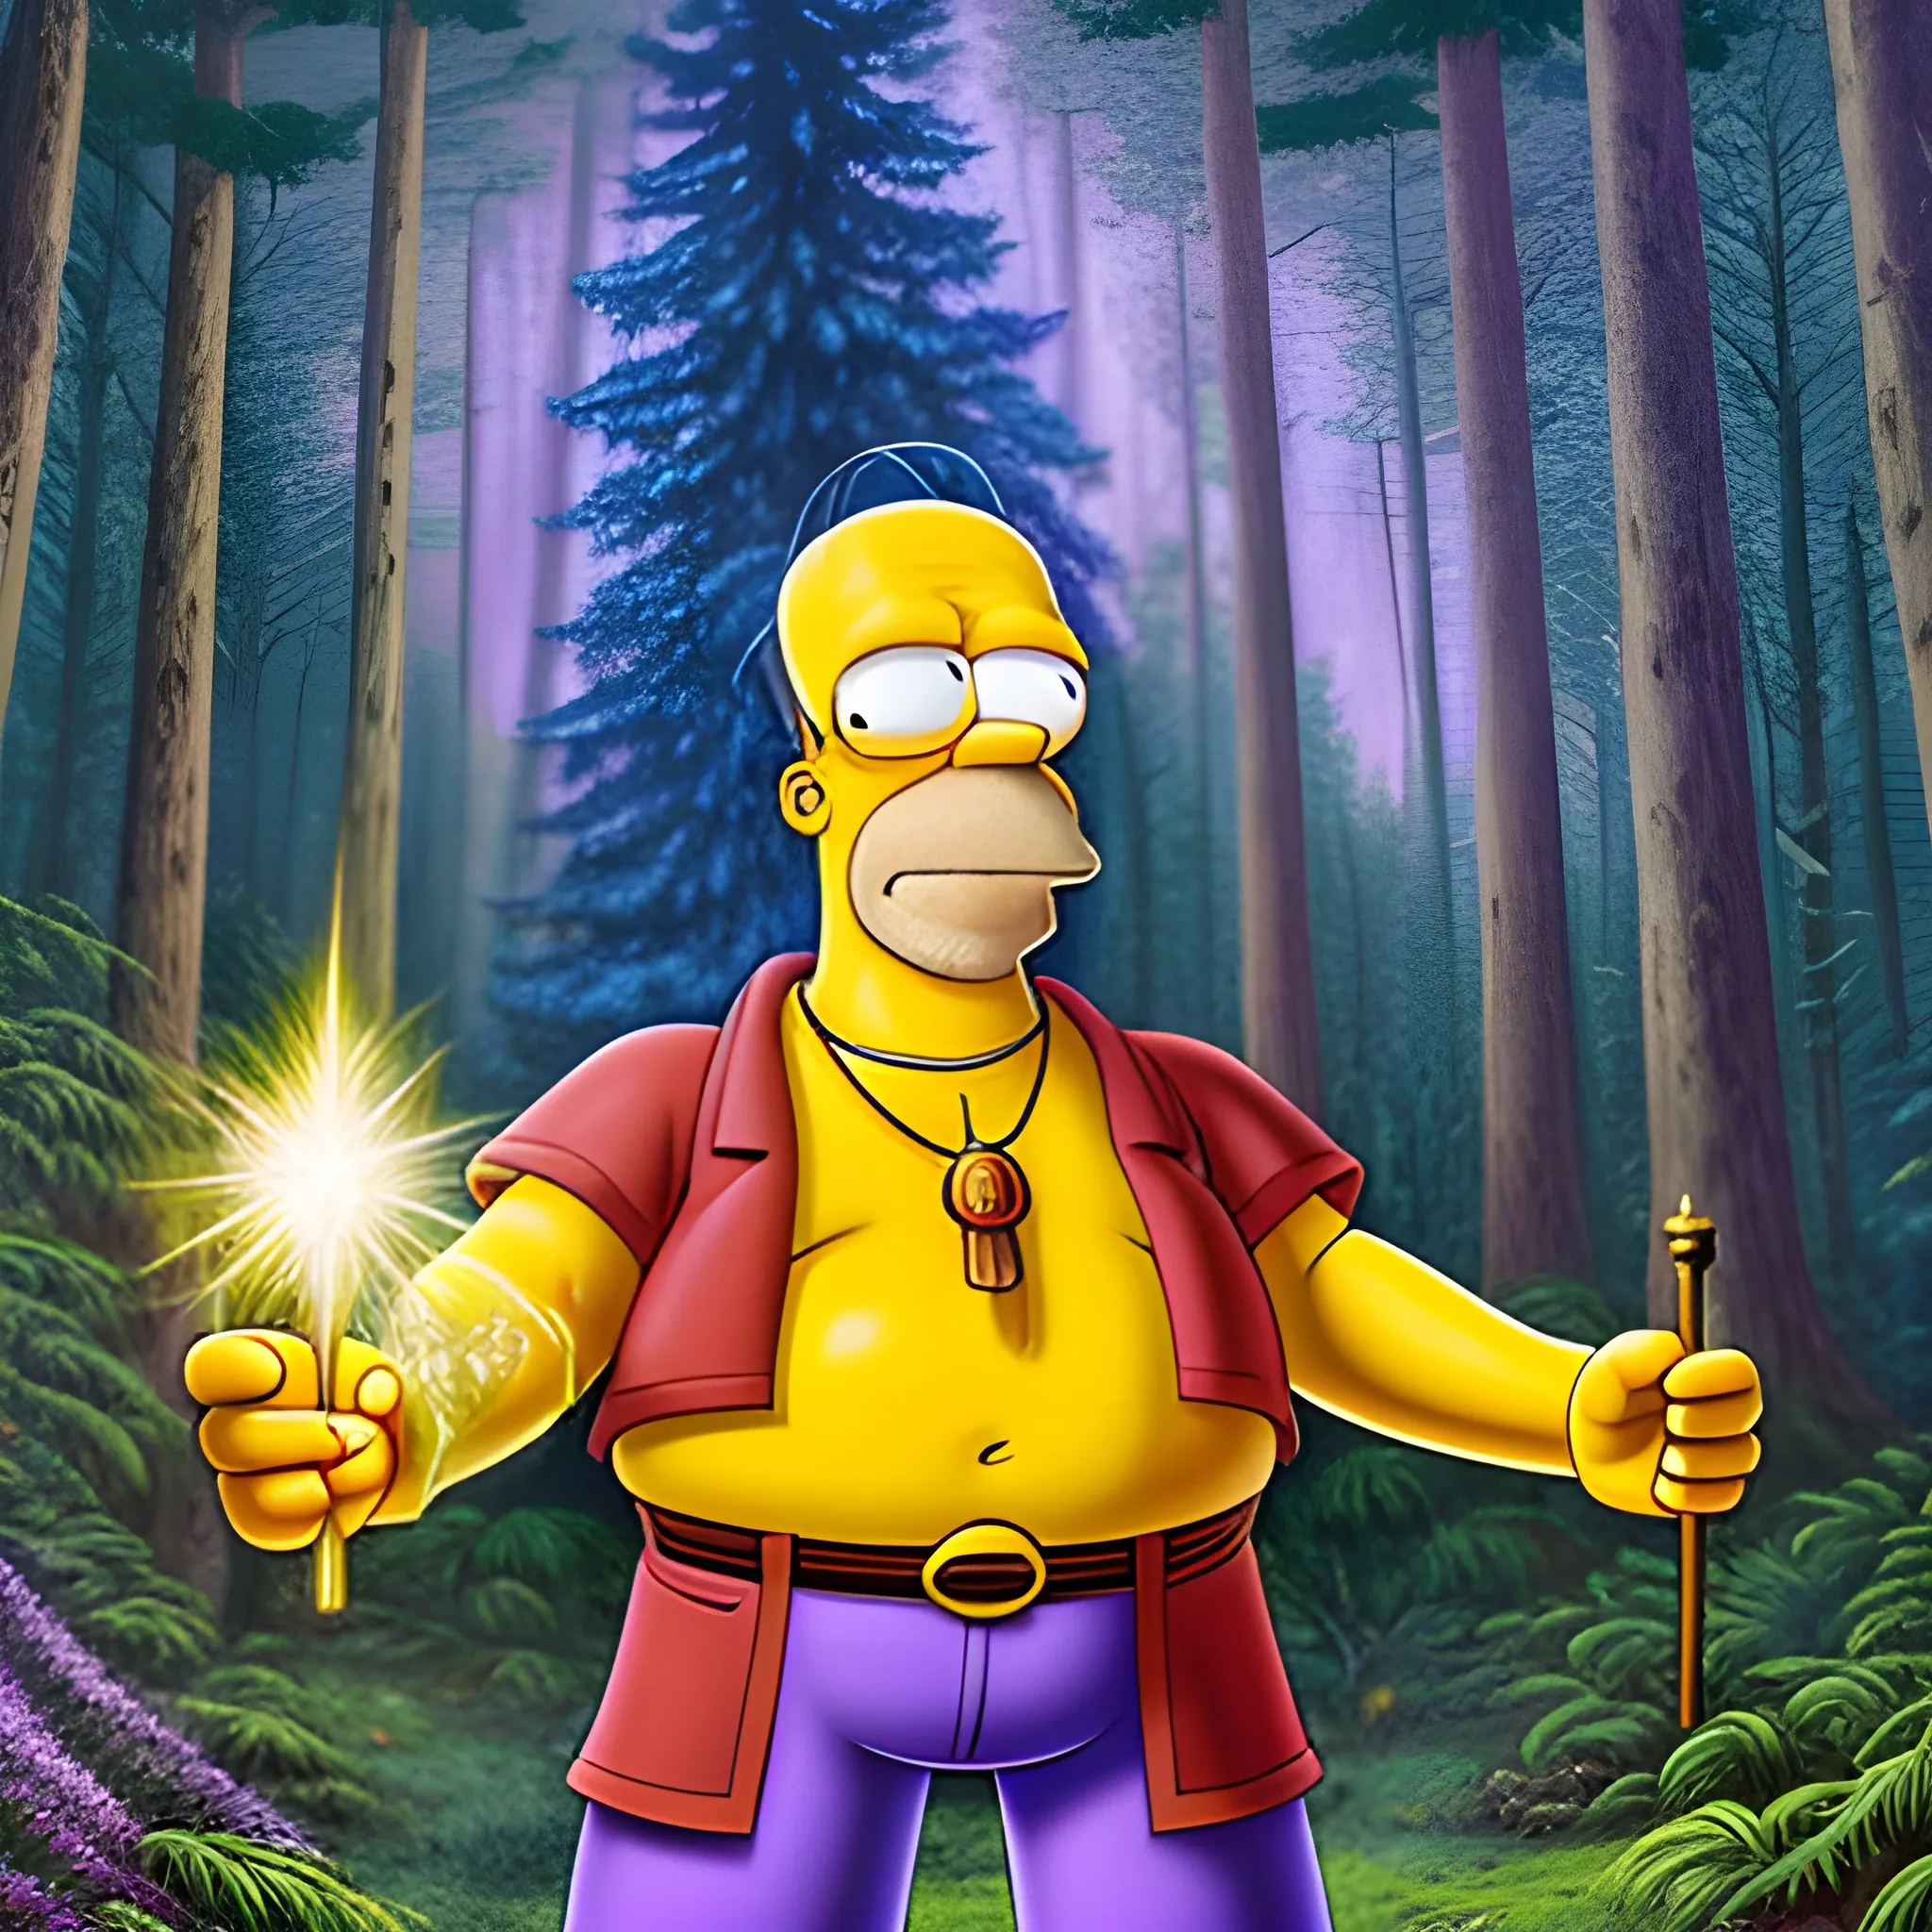 Homer Simpson, standing in the middle of the forrest path, dressed in a hyper detailed sorcerer's outfit, holds a hyper detailed magic wand from which a ray of light emanates, hyper detailed magical background